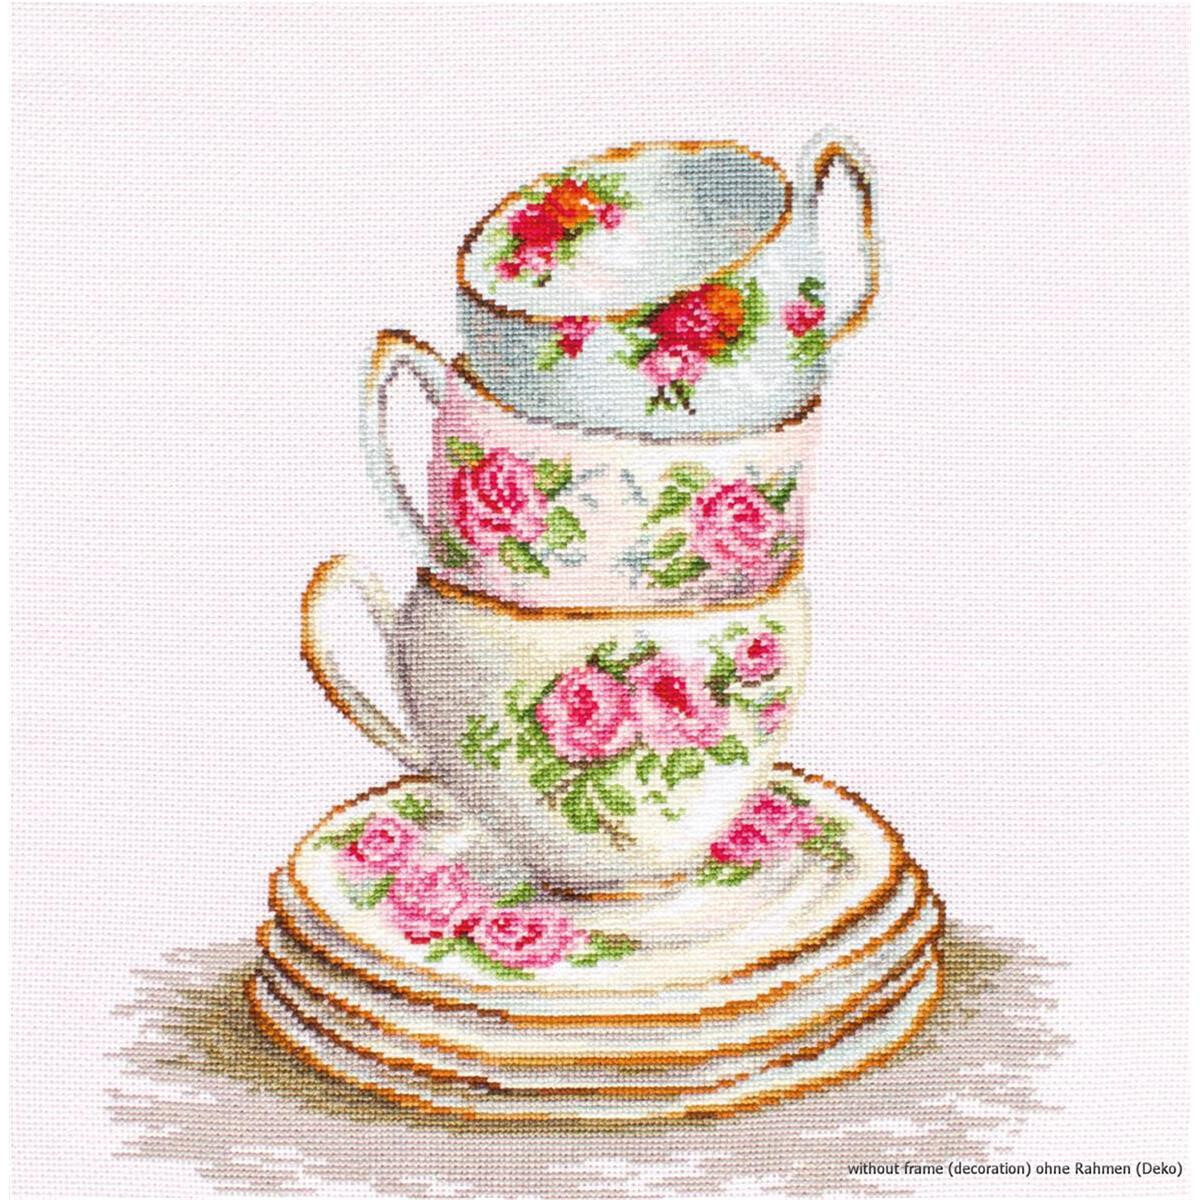 One illustration shows a stack of three teacups and...